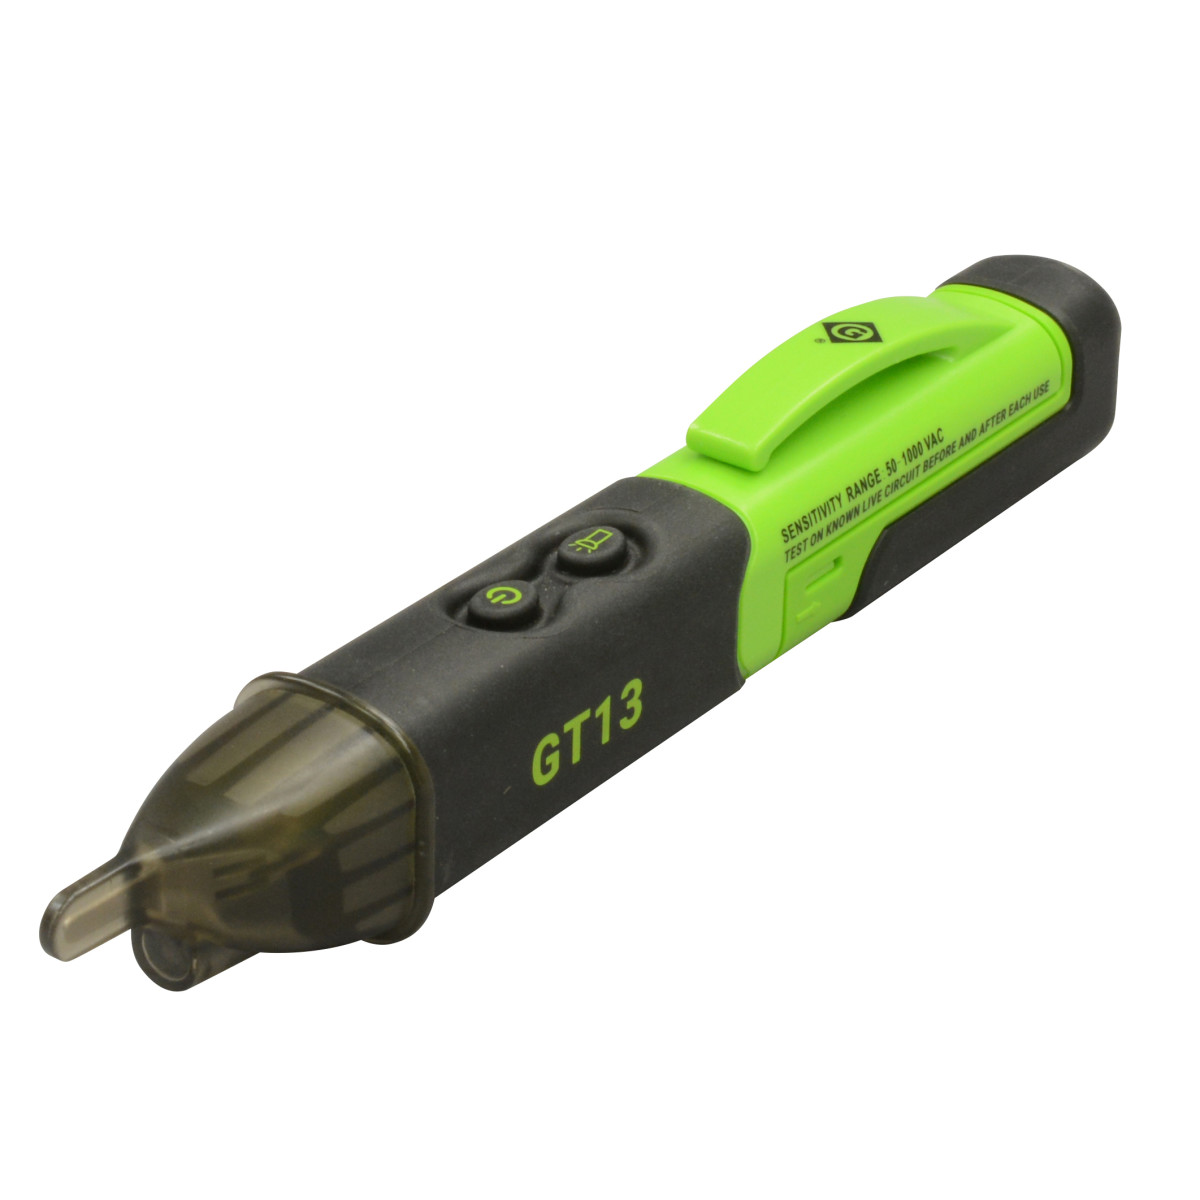 Non-contact voltage detection from 50V to 1000V AC. Patented automatic self-test verifies circuit integrity.  Audible and visual alert when voltage is present. Bright flashlight for use in dark work areas.  Can be used to detect voltage in outlets, l...